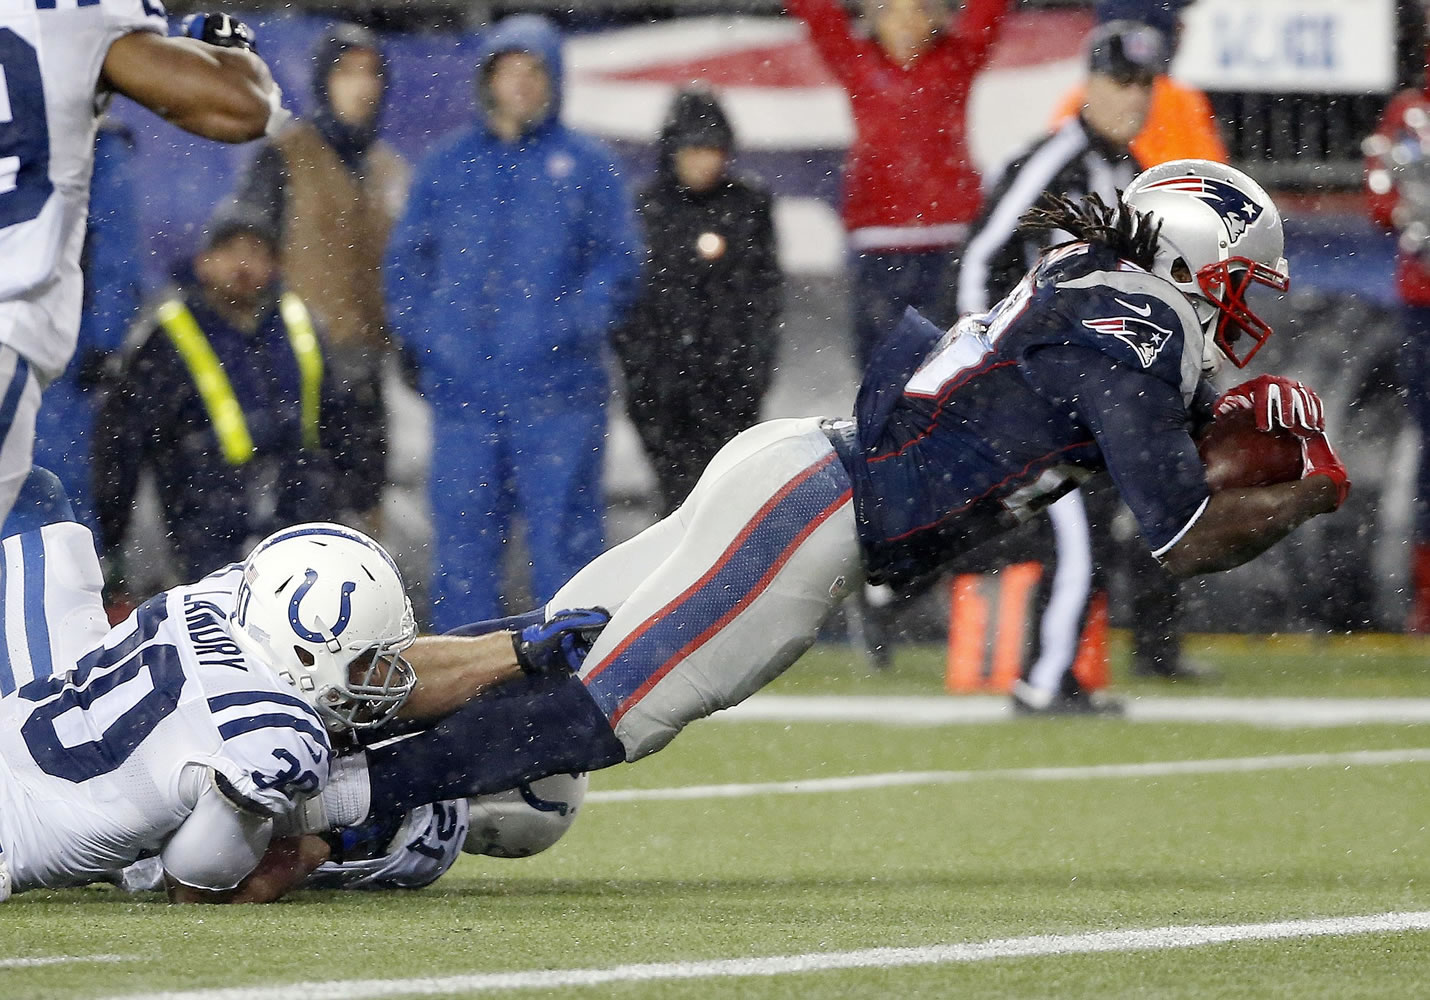 New England Patriots running back LeGarrette Blount (29) scores on a 13-yard touchdown run while being tackled by Indianapolis Colts free safety LaRon Landry during the second half of the NFL football AFC Championship game Sunday in Foxborough, Mass.